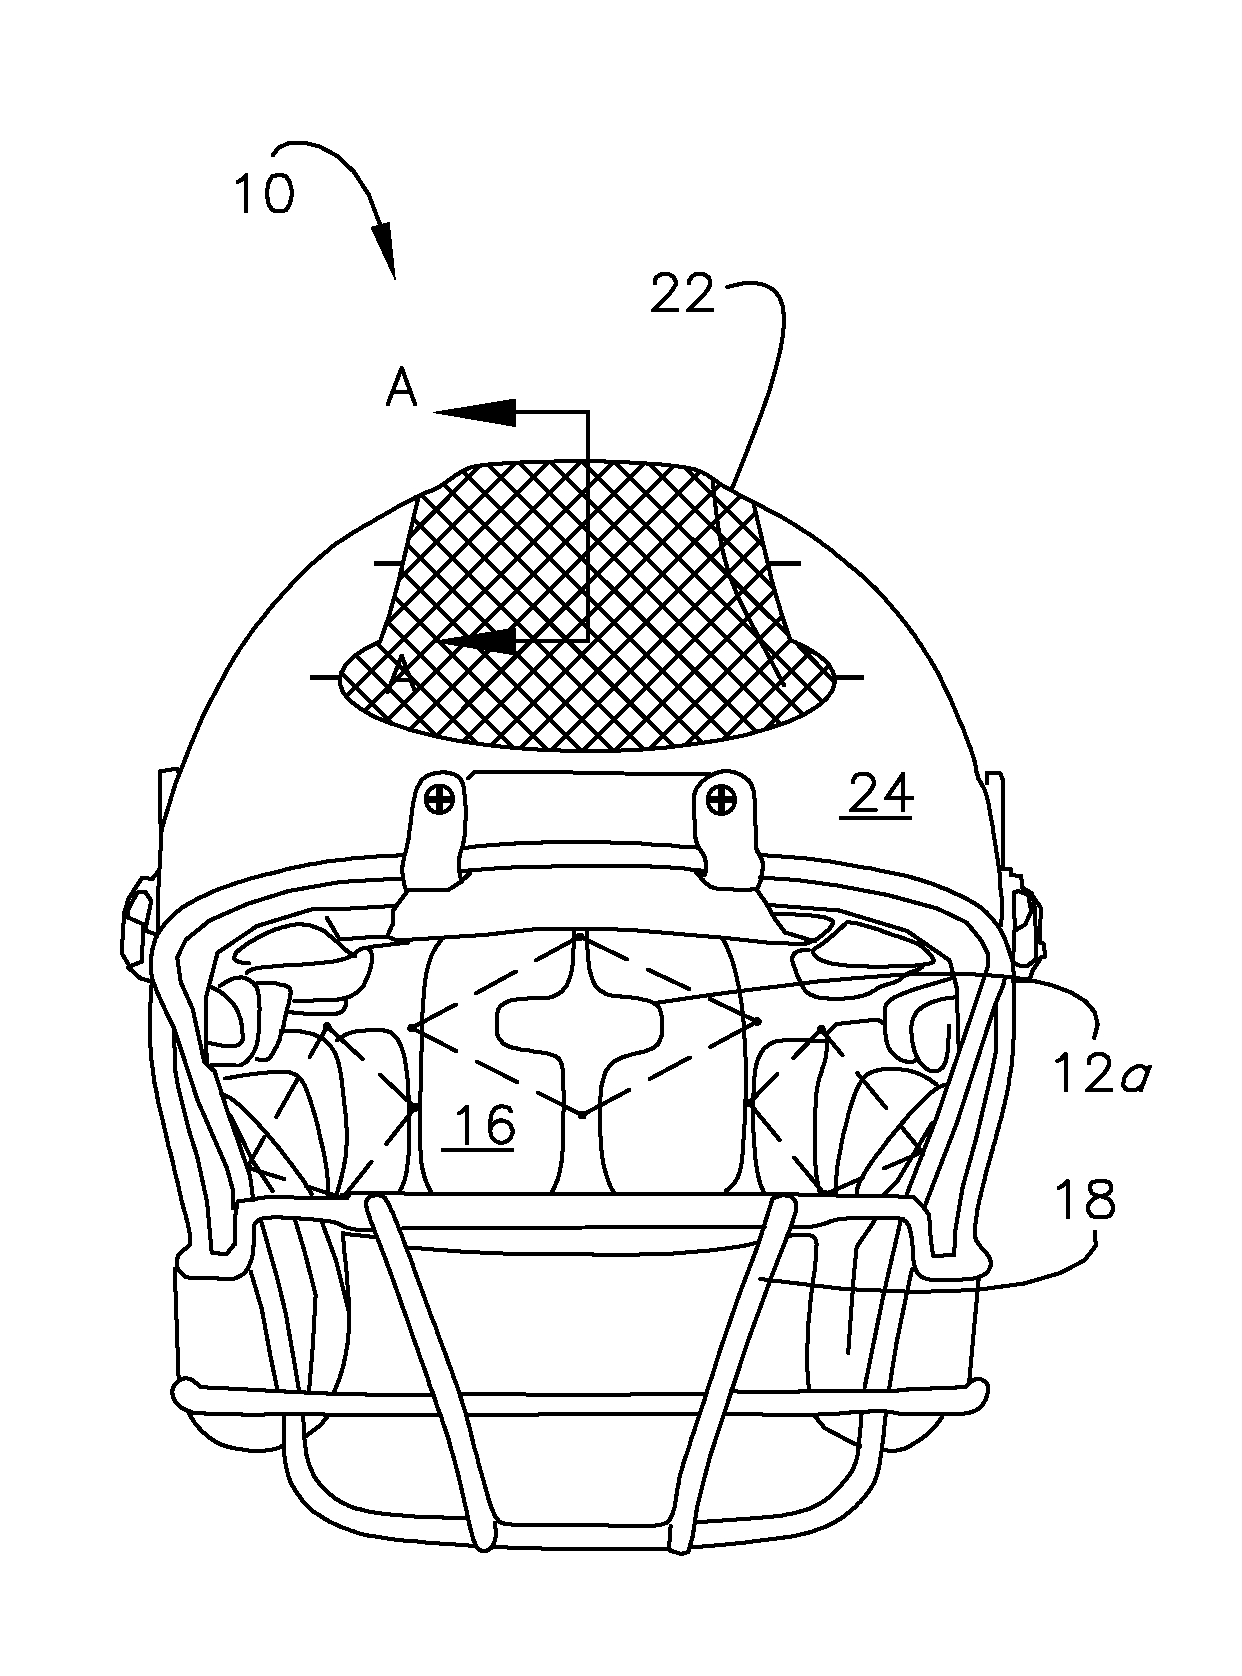 Energy dissipating helmet utilizing stress-induced active material activation